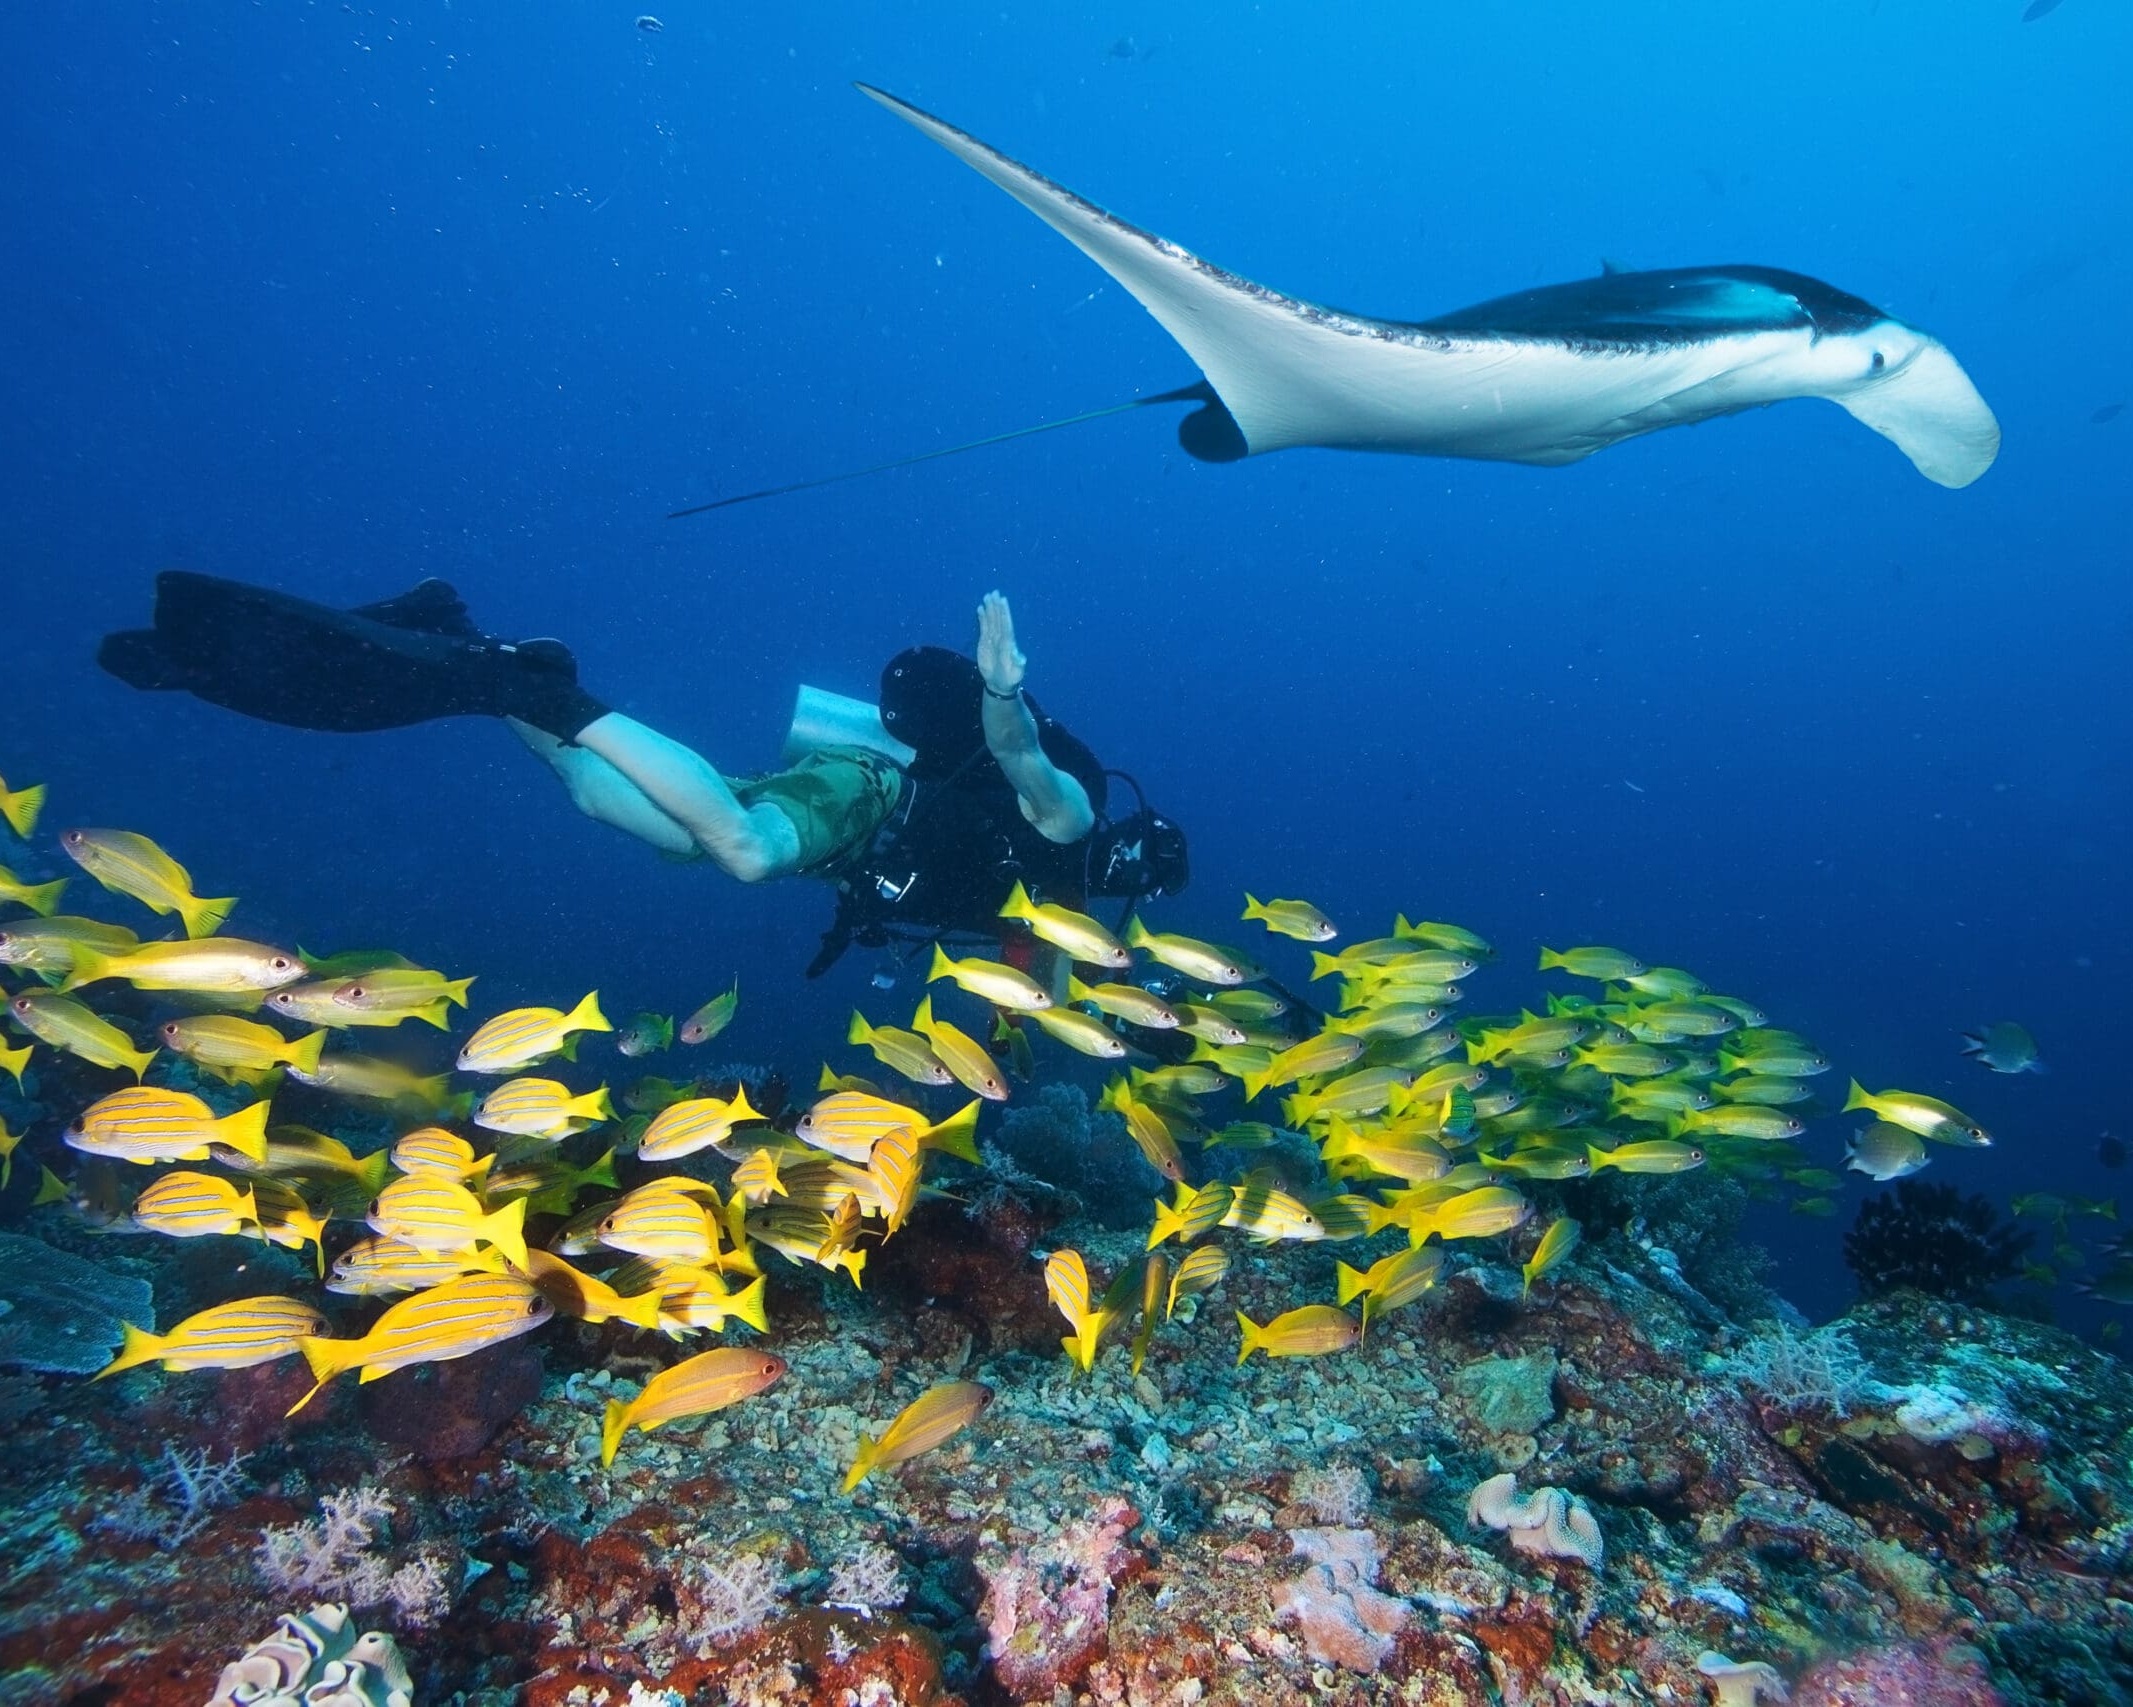 Diver swims with manta ray, Mozambique